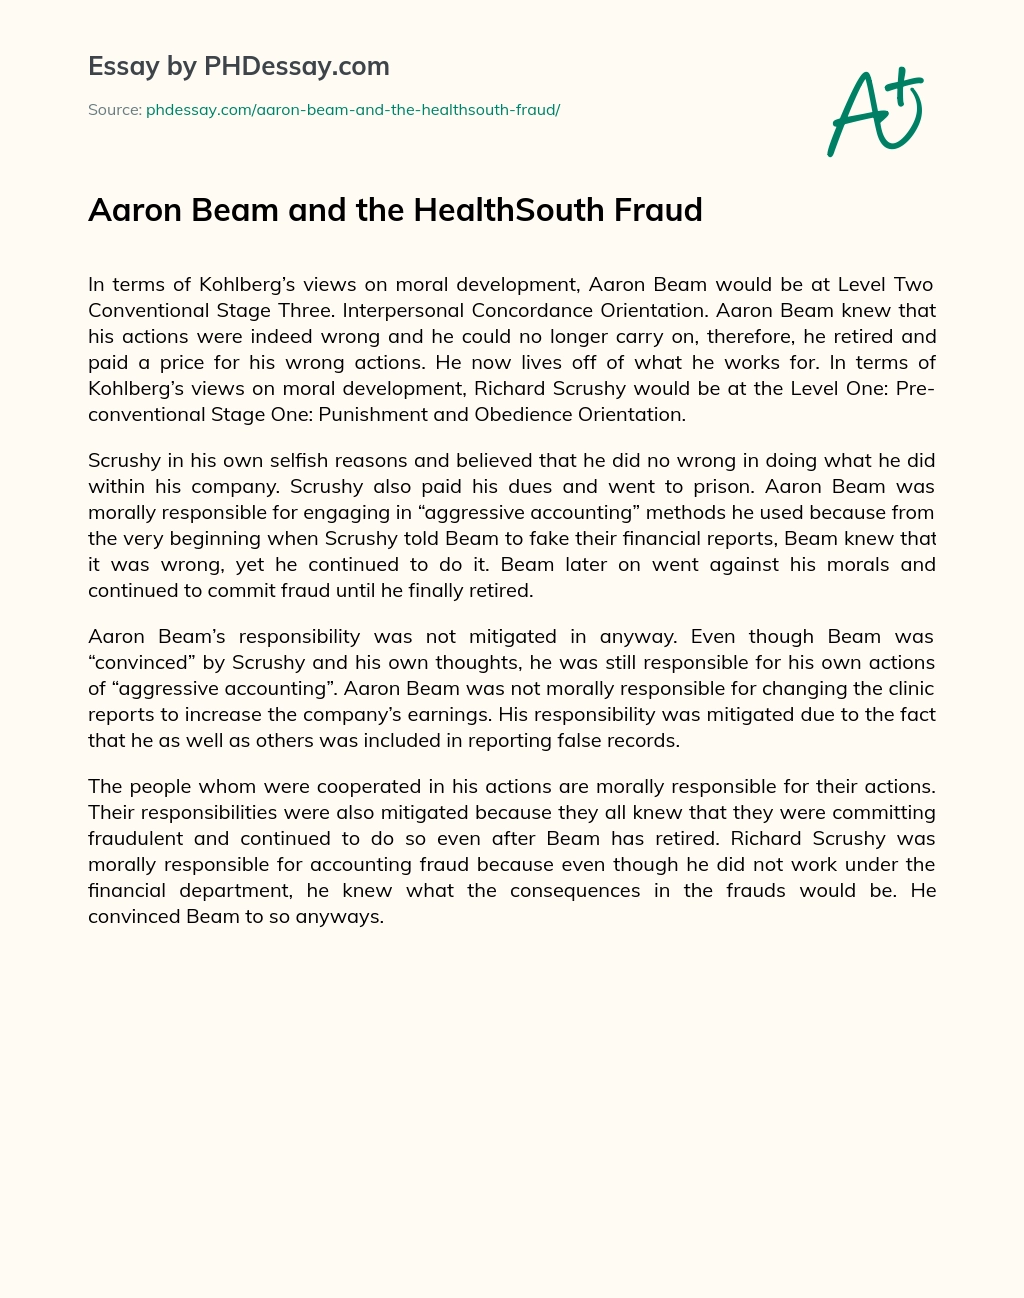 Aaron Beam and the HealthSouth Fraud essay